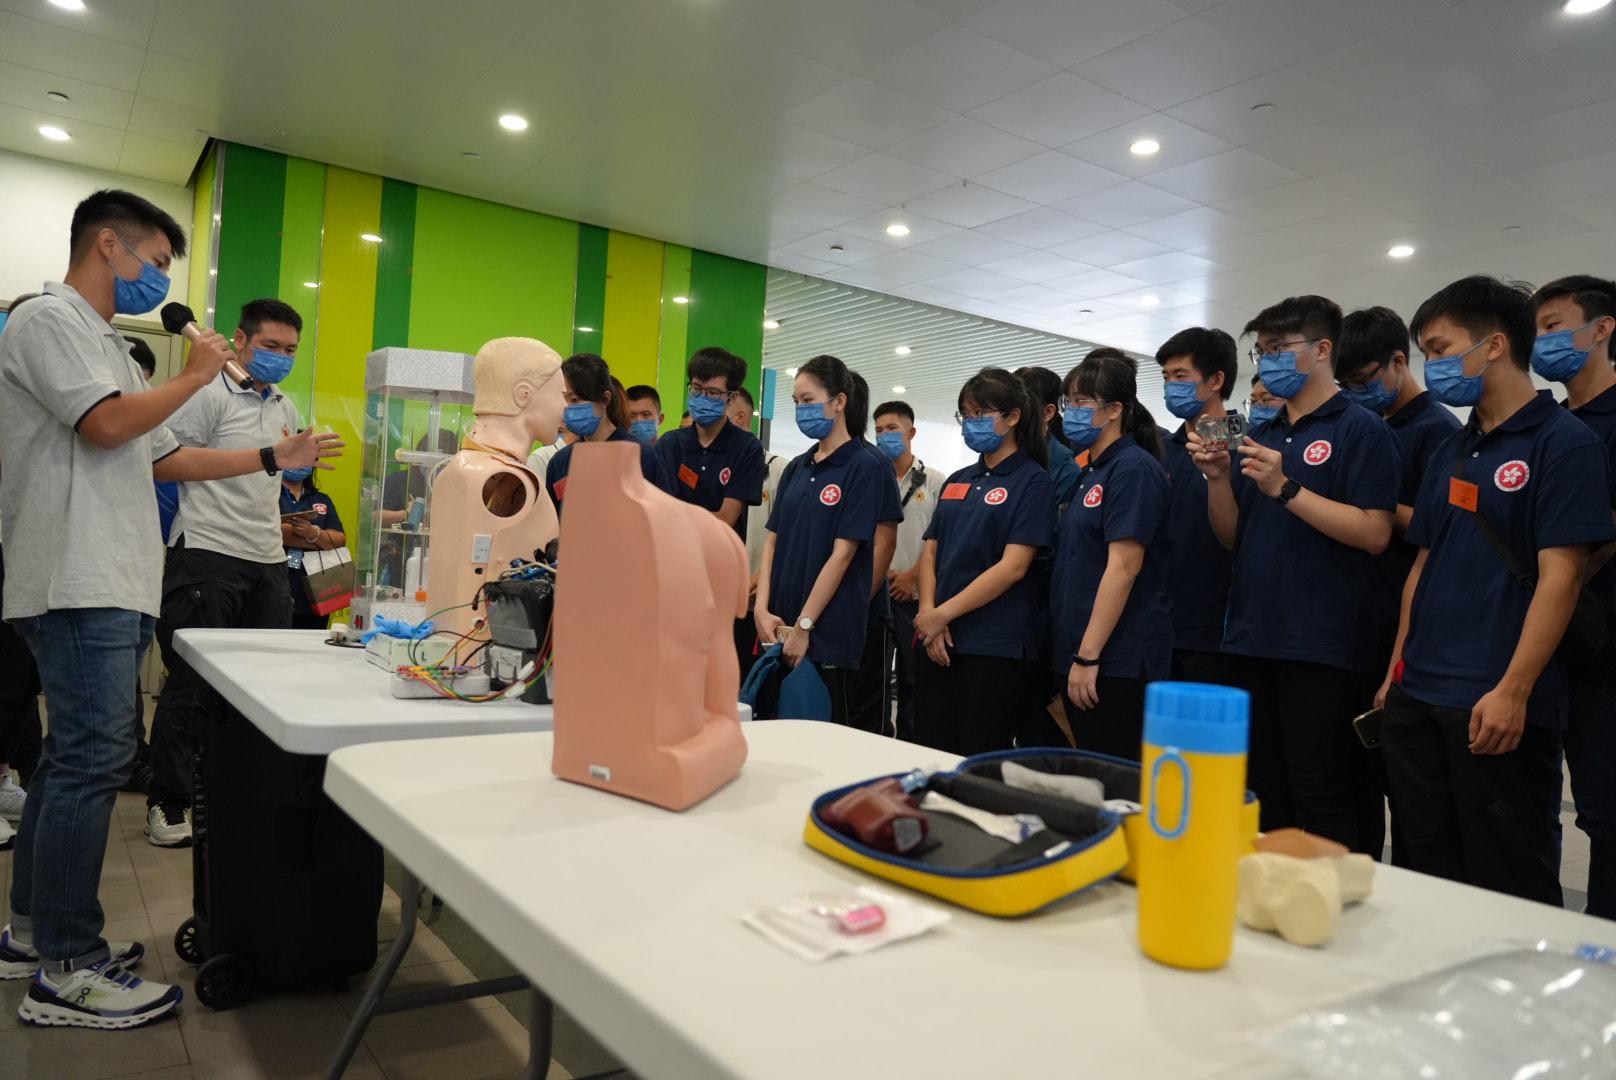 The Security Bureau today (October 22) held a two-day, one-night induction course at the Fire and Ambulance Services Academy in Tseung Kwan O for members of the Security Bureau Youth Uniformed Group Leaders Forum. Photo shows members of the Leaders Forum listened carefully to the staff of the Fire and Ambulance Services Academy explaining the use of ambulance equipment.
